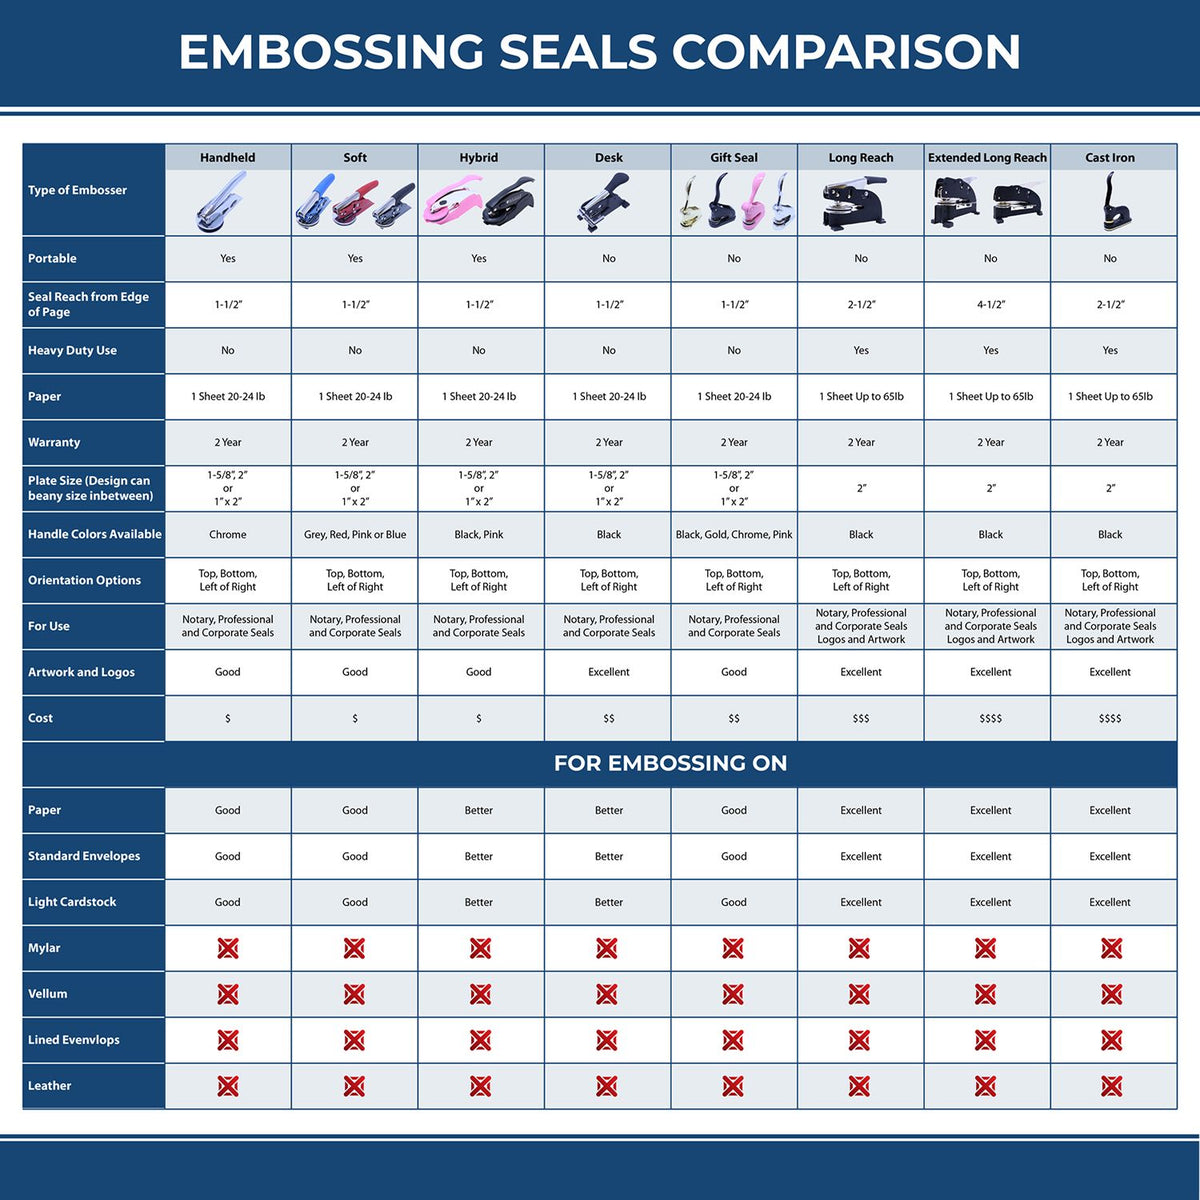 A comparison chart for the different types of mount models available for the State of Massachusetts Soft Land Surveyor Embossing Seal.